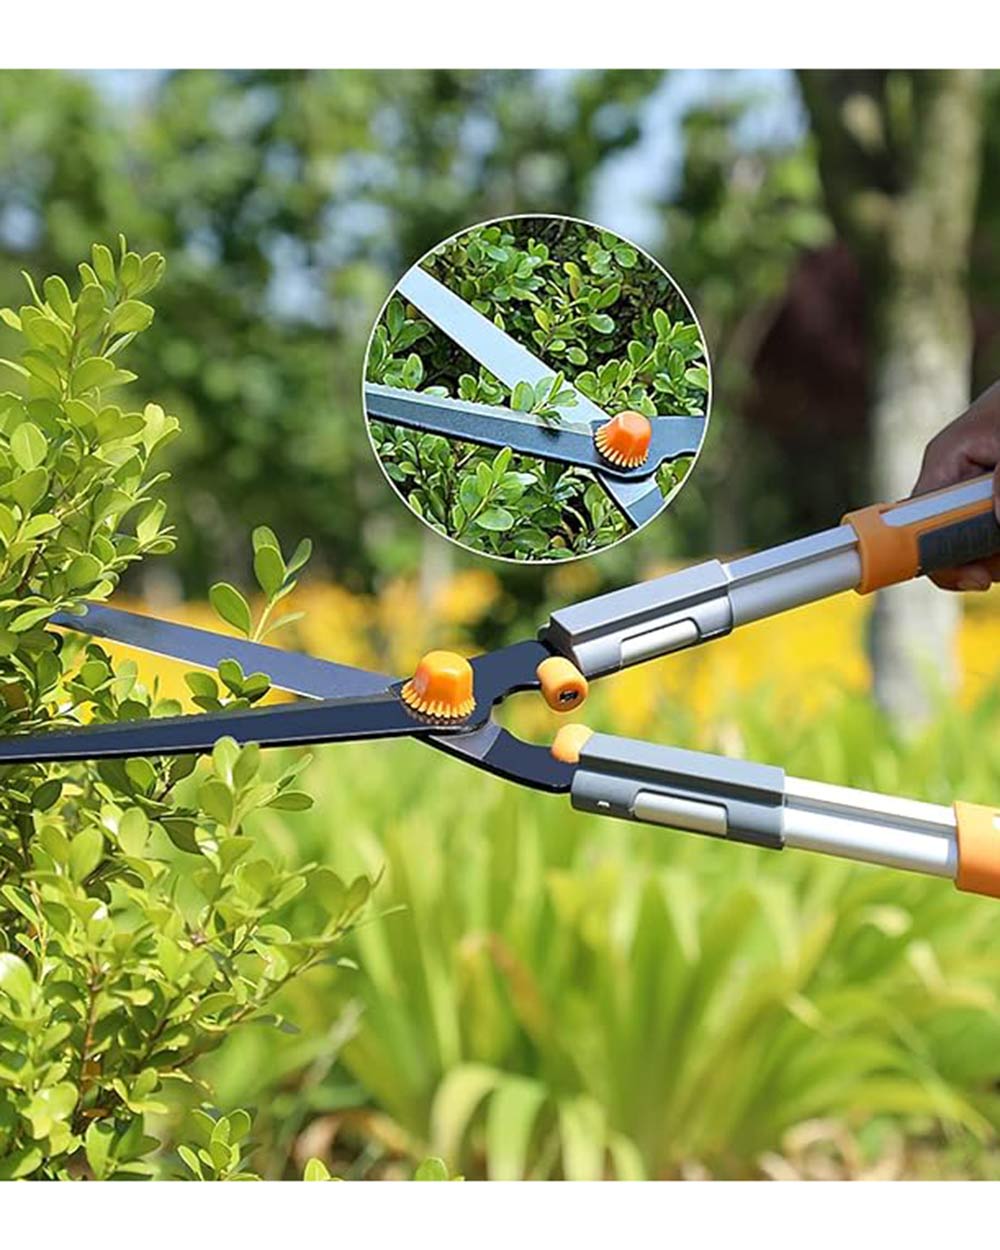 AIRJA Proffessional Garden Shears and Hedge Clippers Set